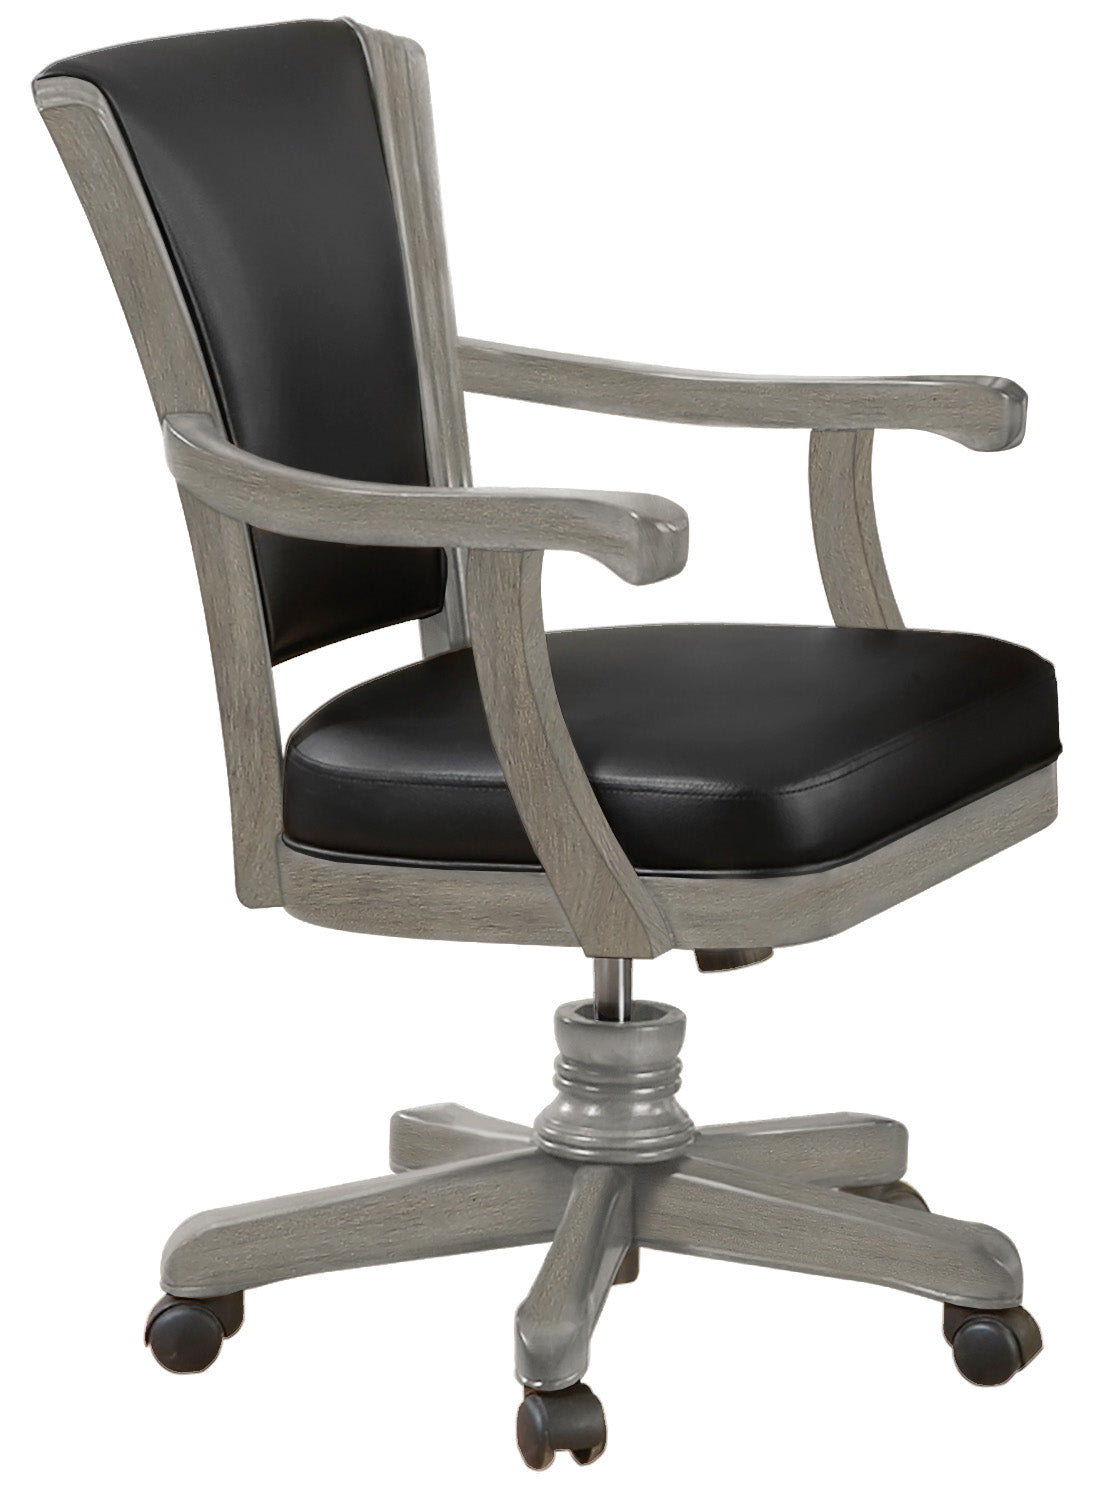 Legacy Billiards Elite Gas Lift Game Chair in Overcast Finish